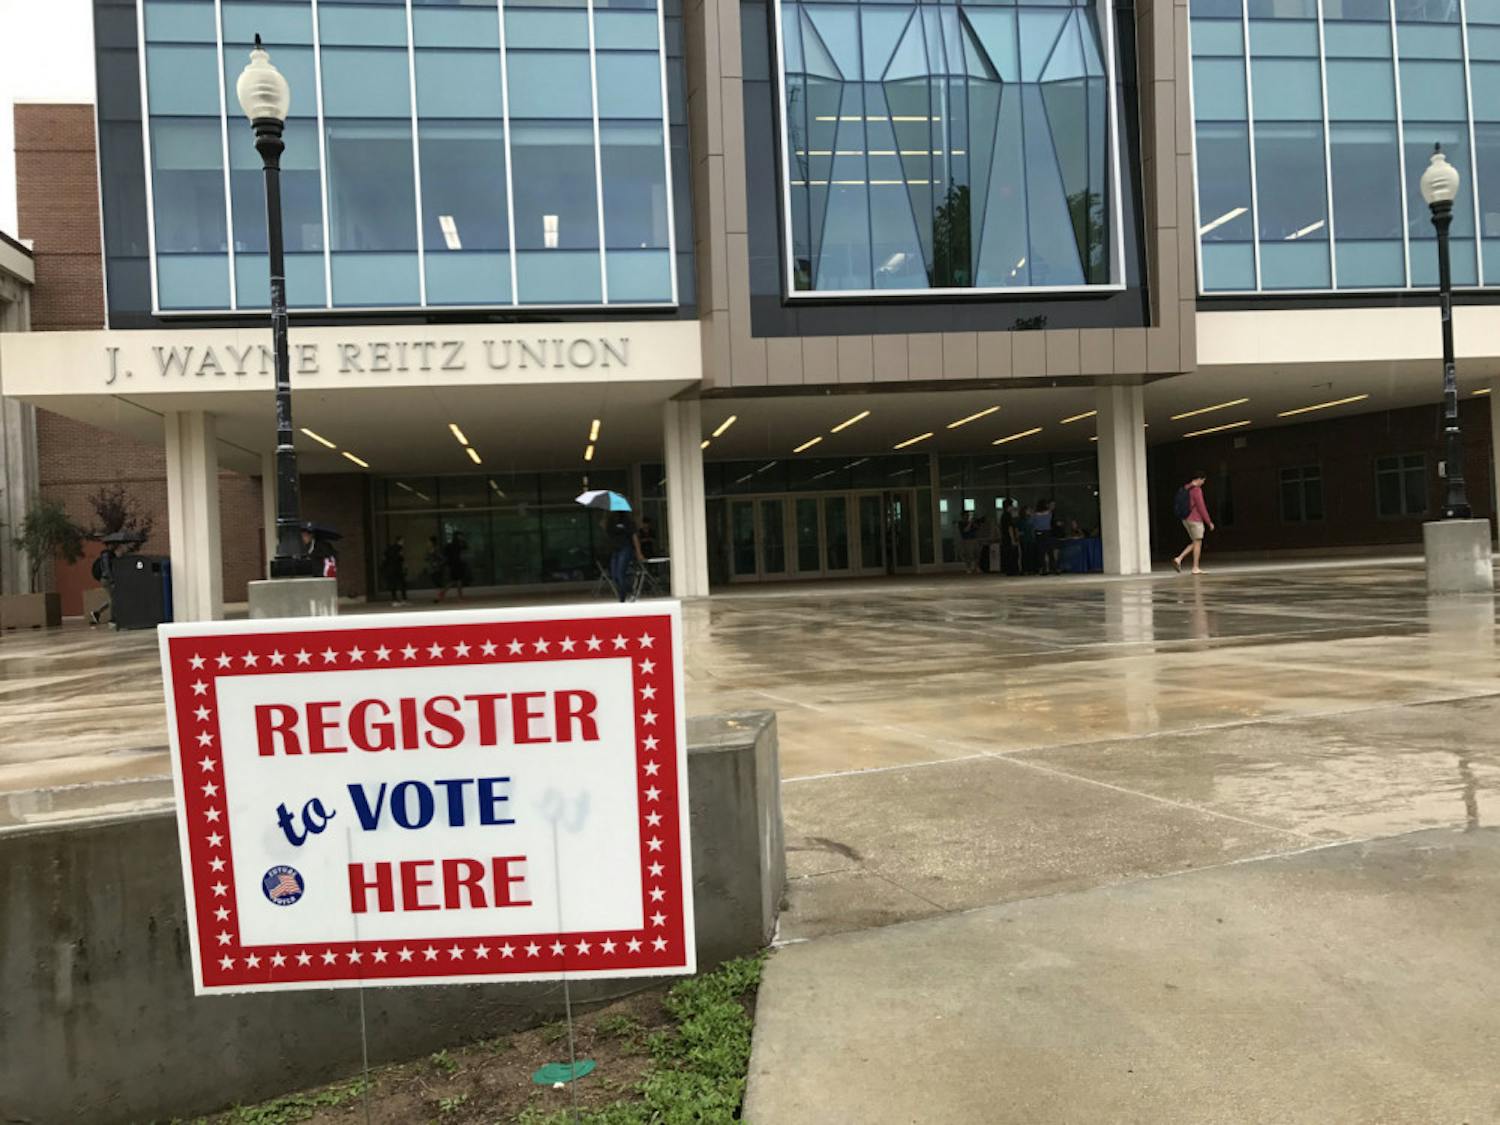 The Reitz Union has been designated an early voting site for the 2018 general election from Oct. 22 to Nov. 3.